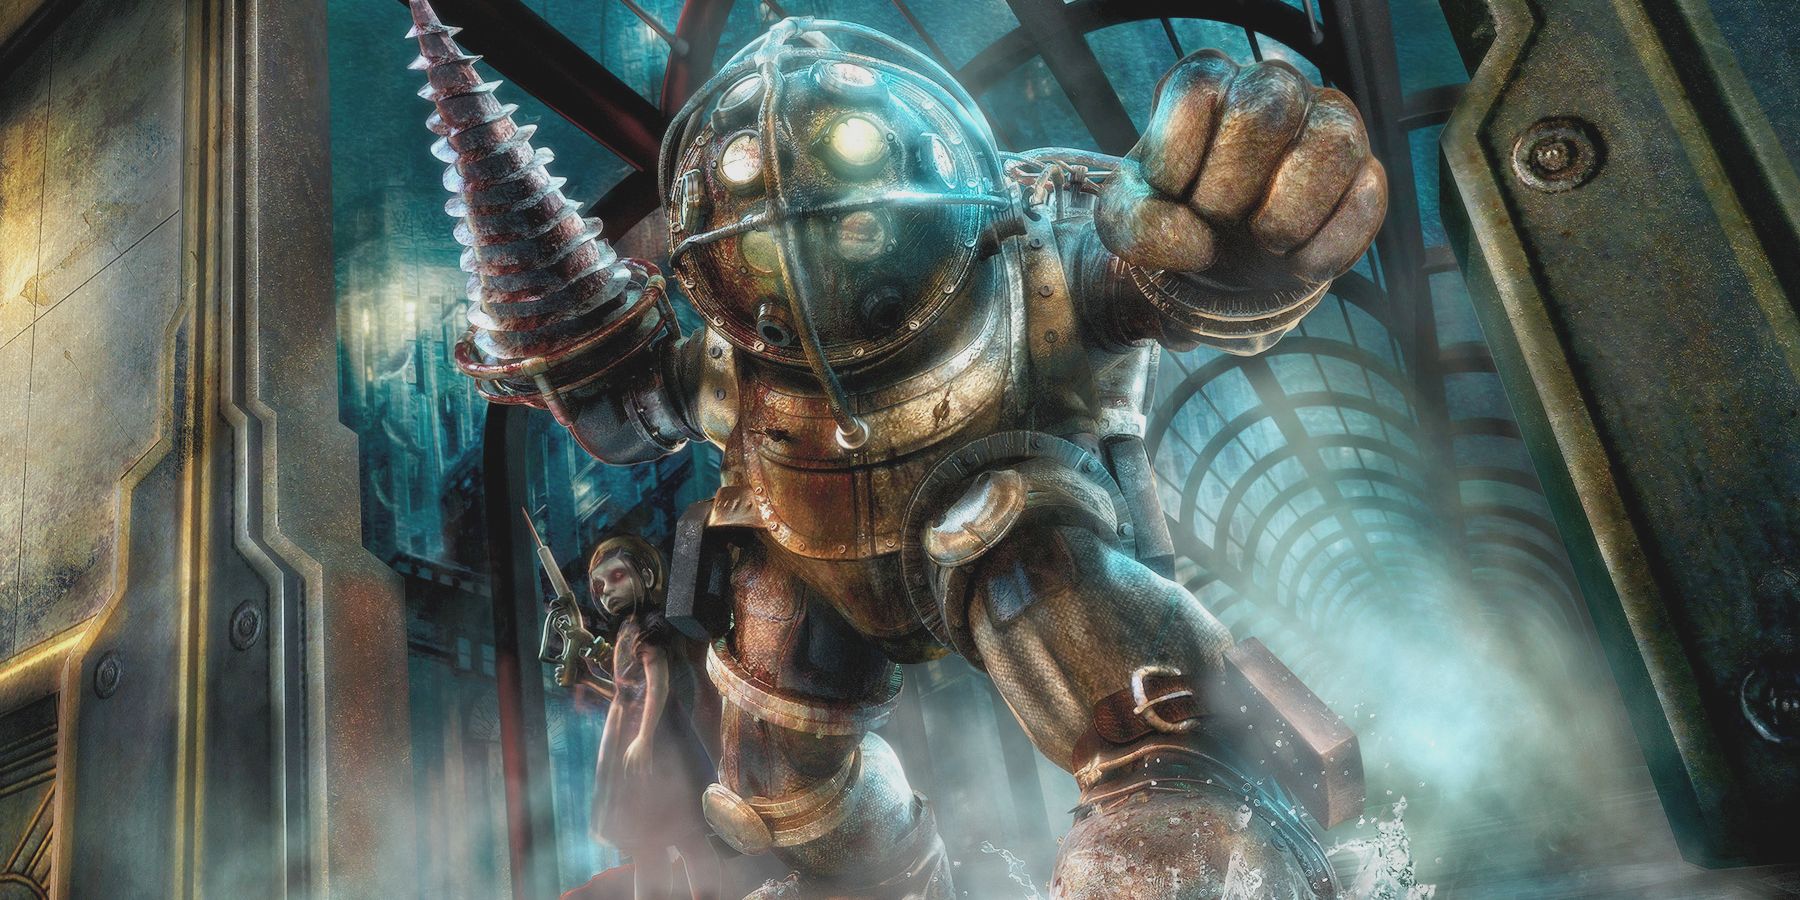 Big Daddy and Little Sister stand side-by-side from BioShock video game.